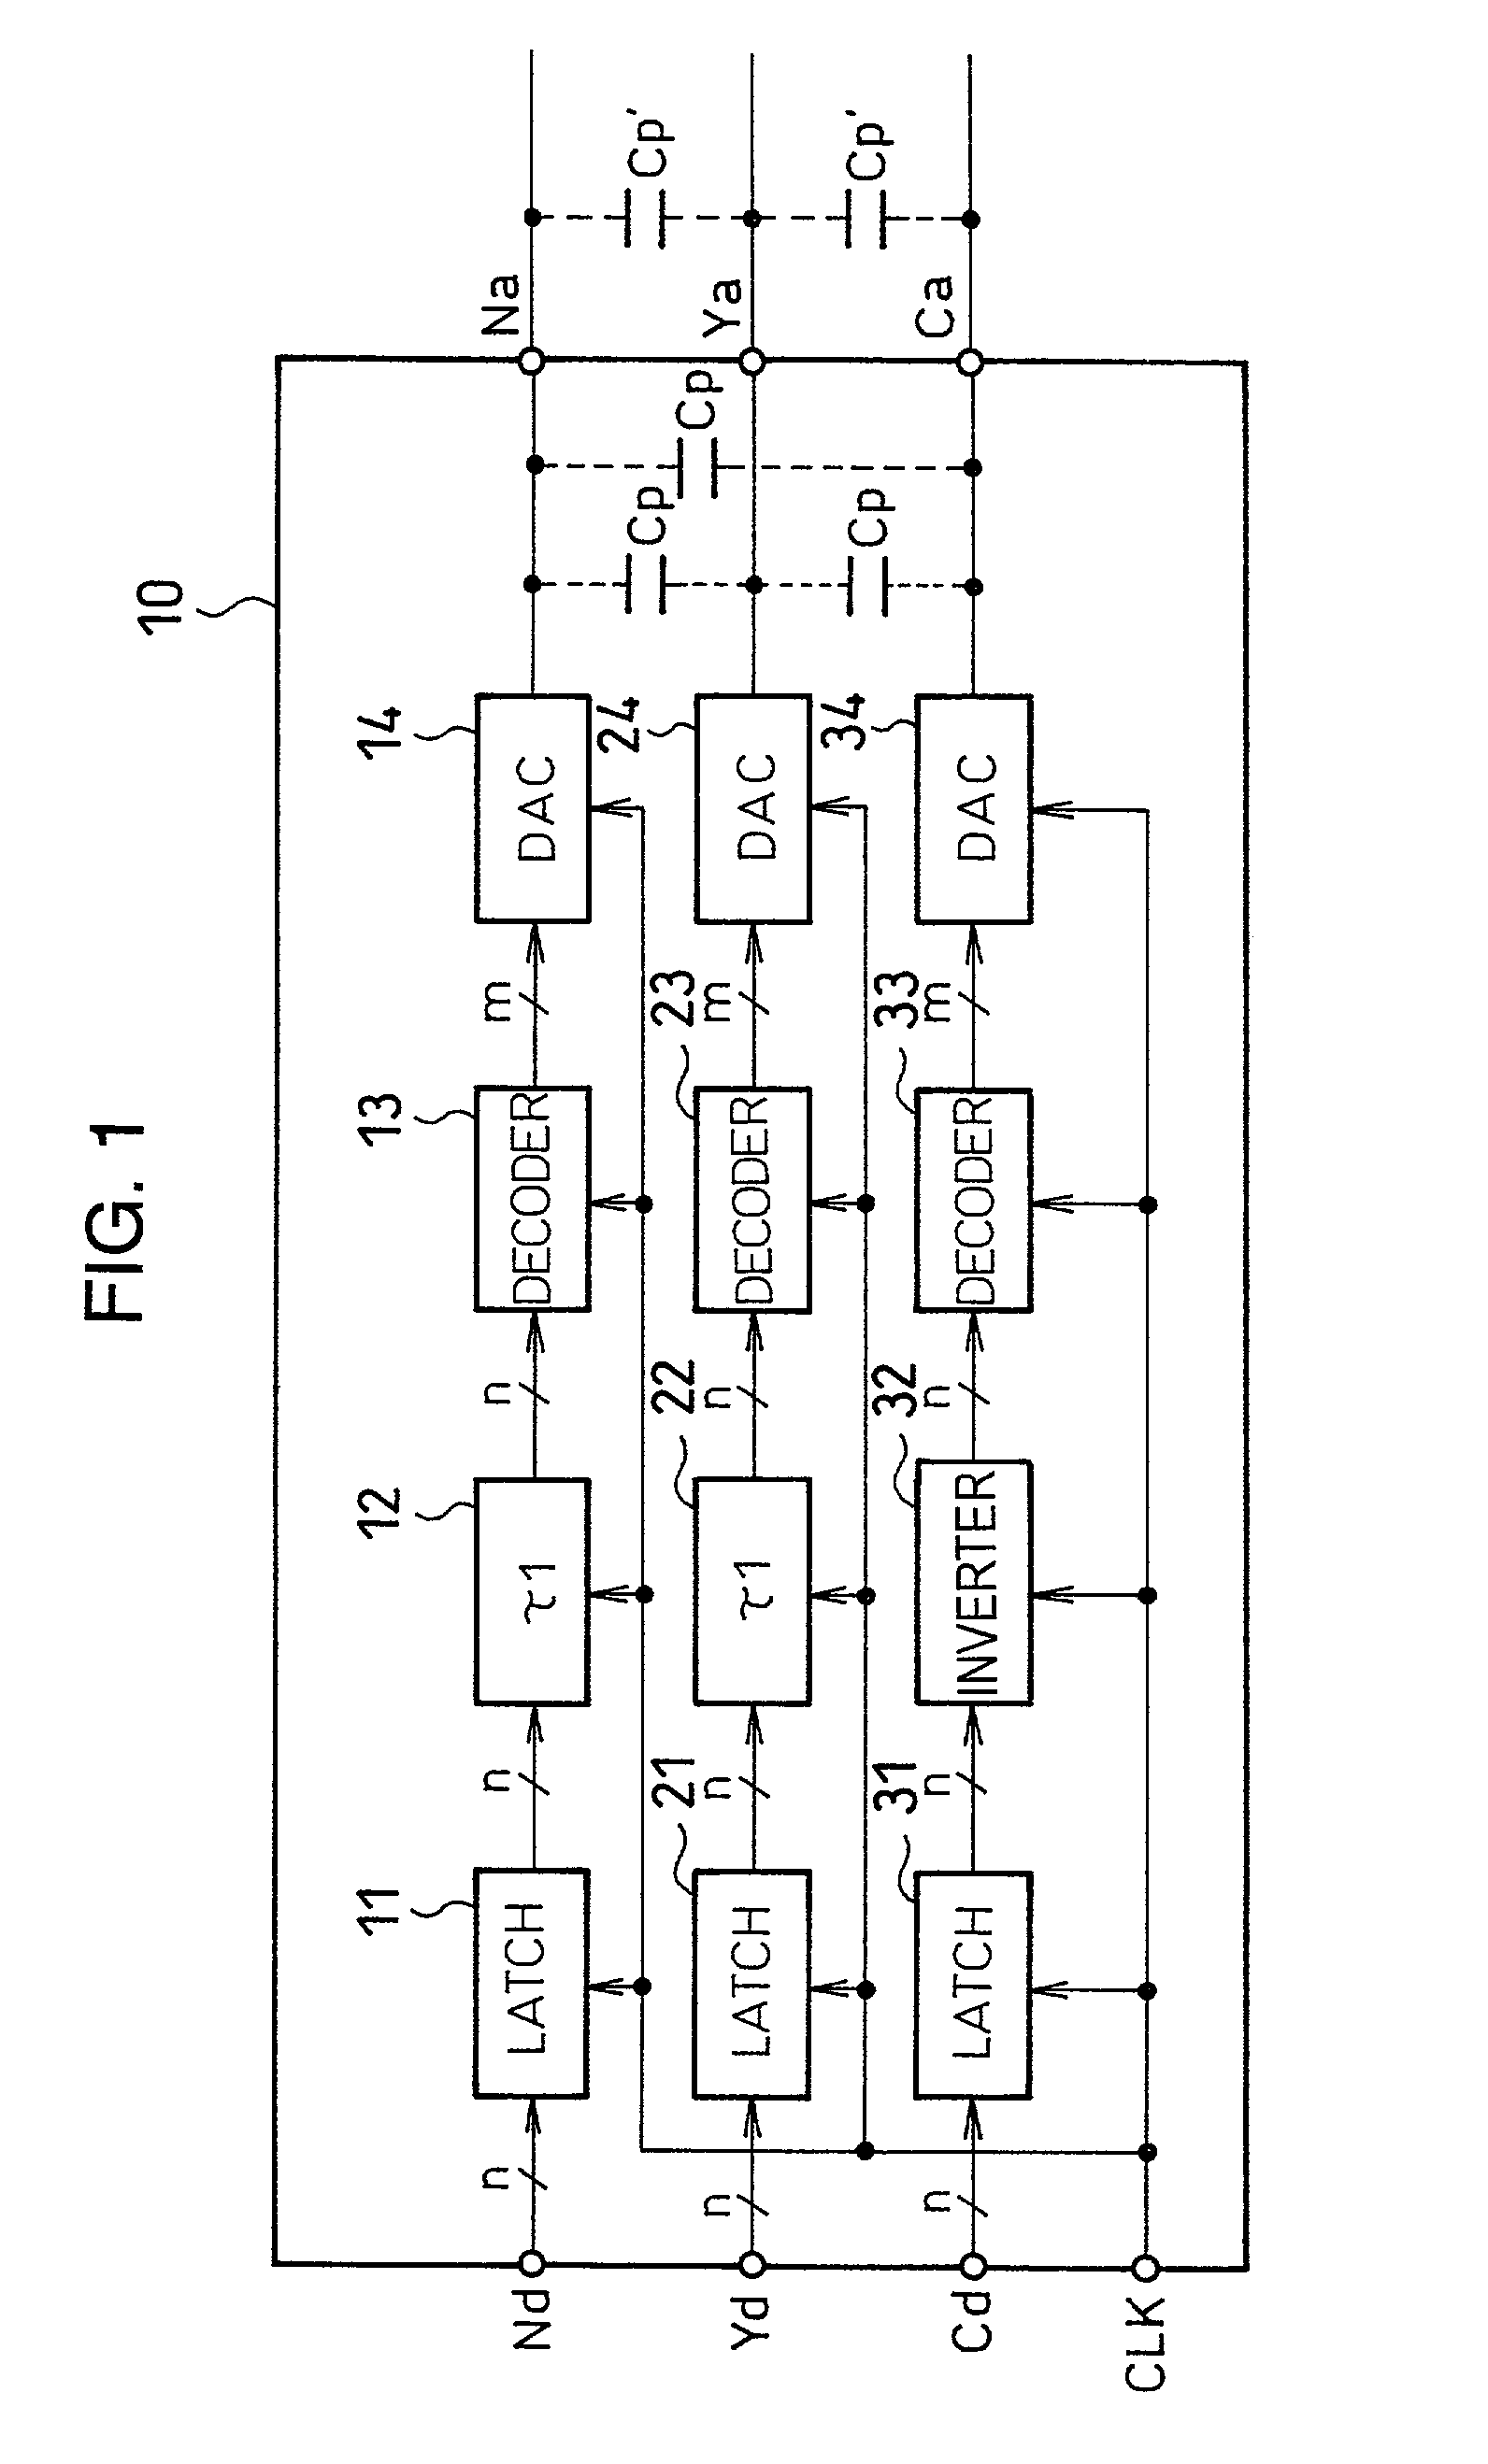 Semiconductor device having DAC channels for video signals